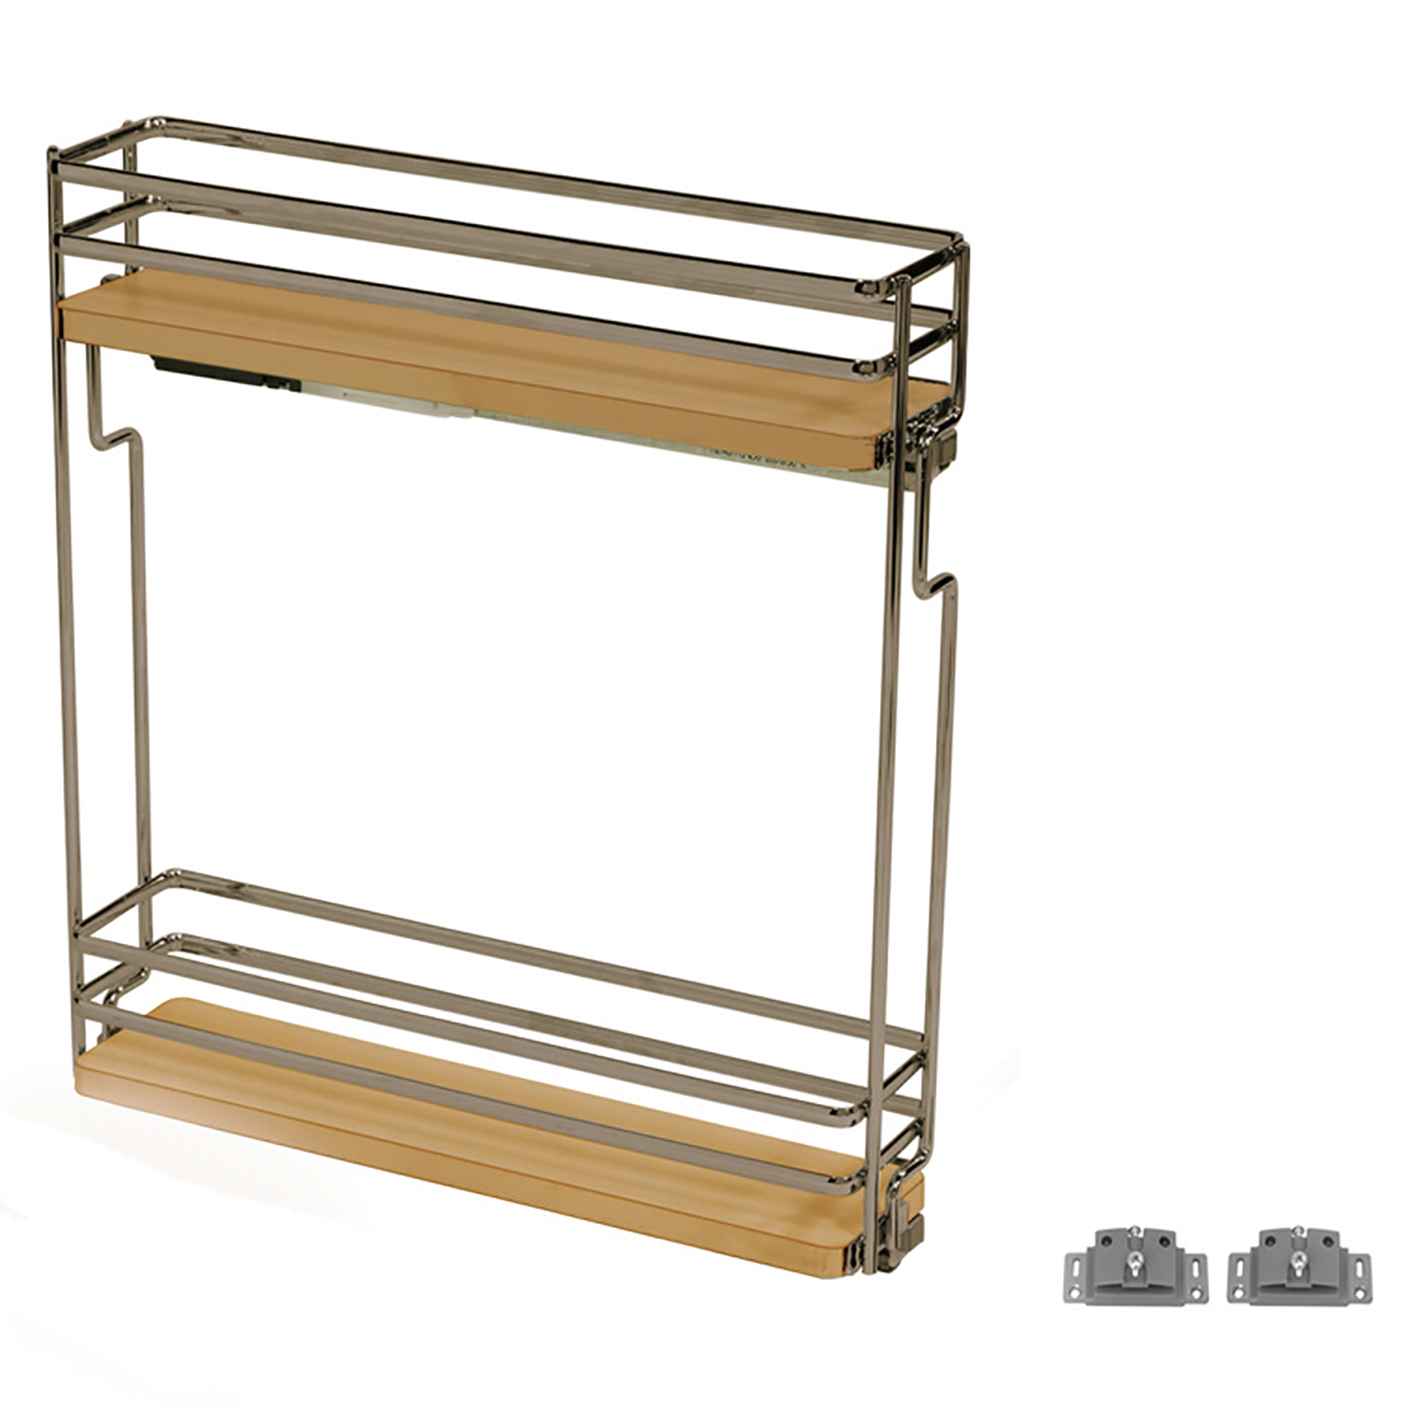 Vibo Galaxy 2 Shelf Side Pullout, 4-1/2", Full-Extension, Left Side Mounted, Soft-Close, Maple/Champagne